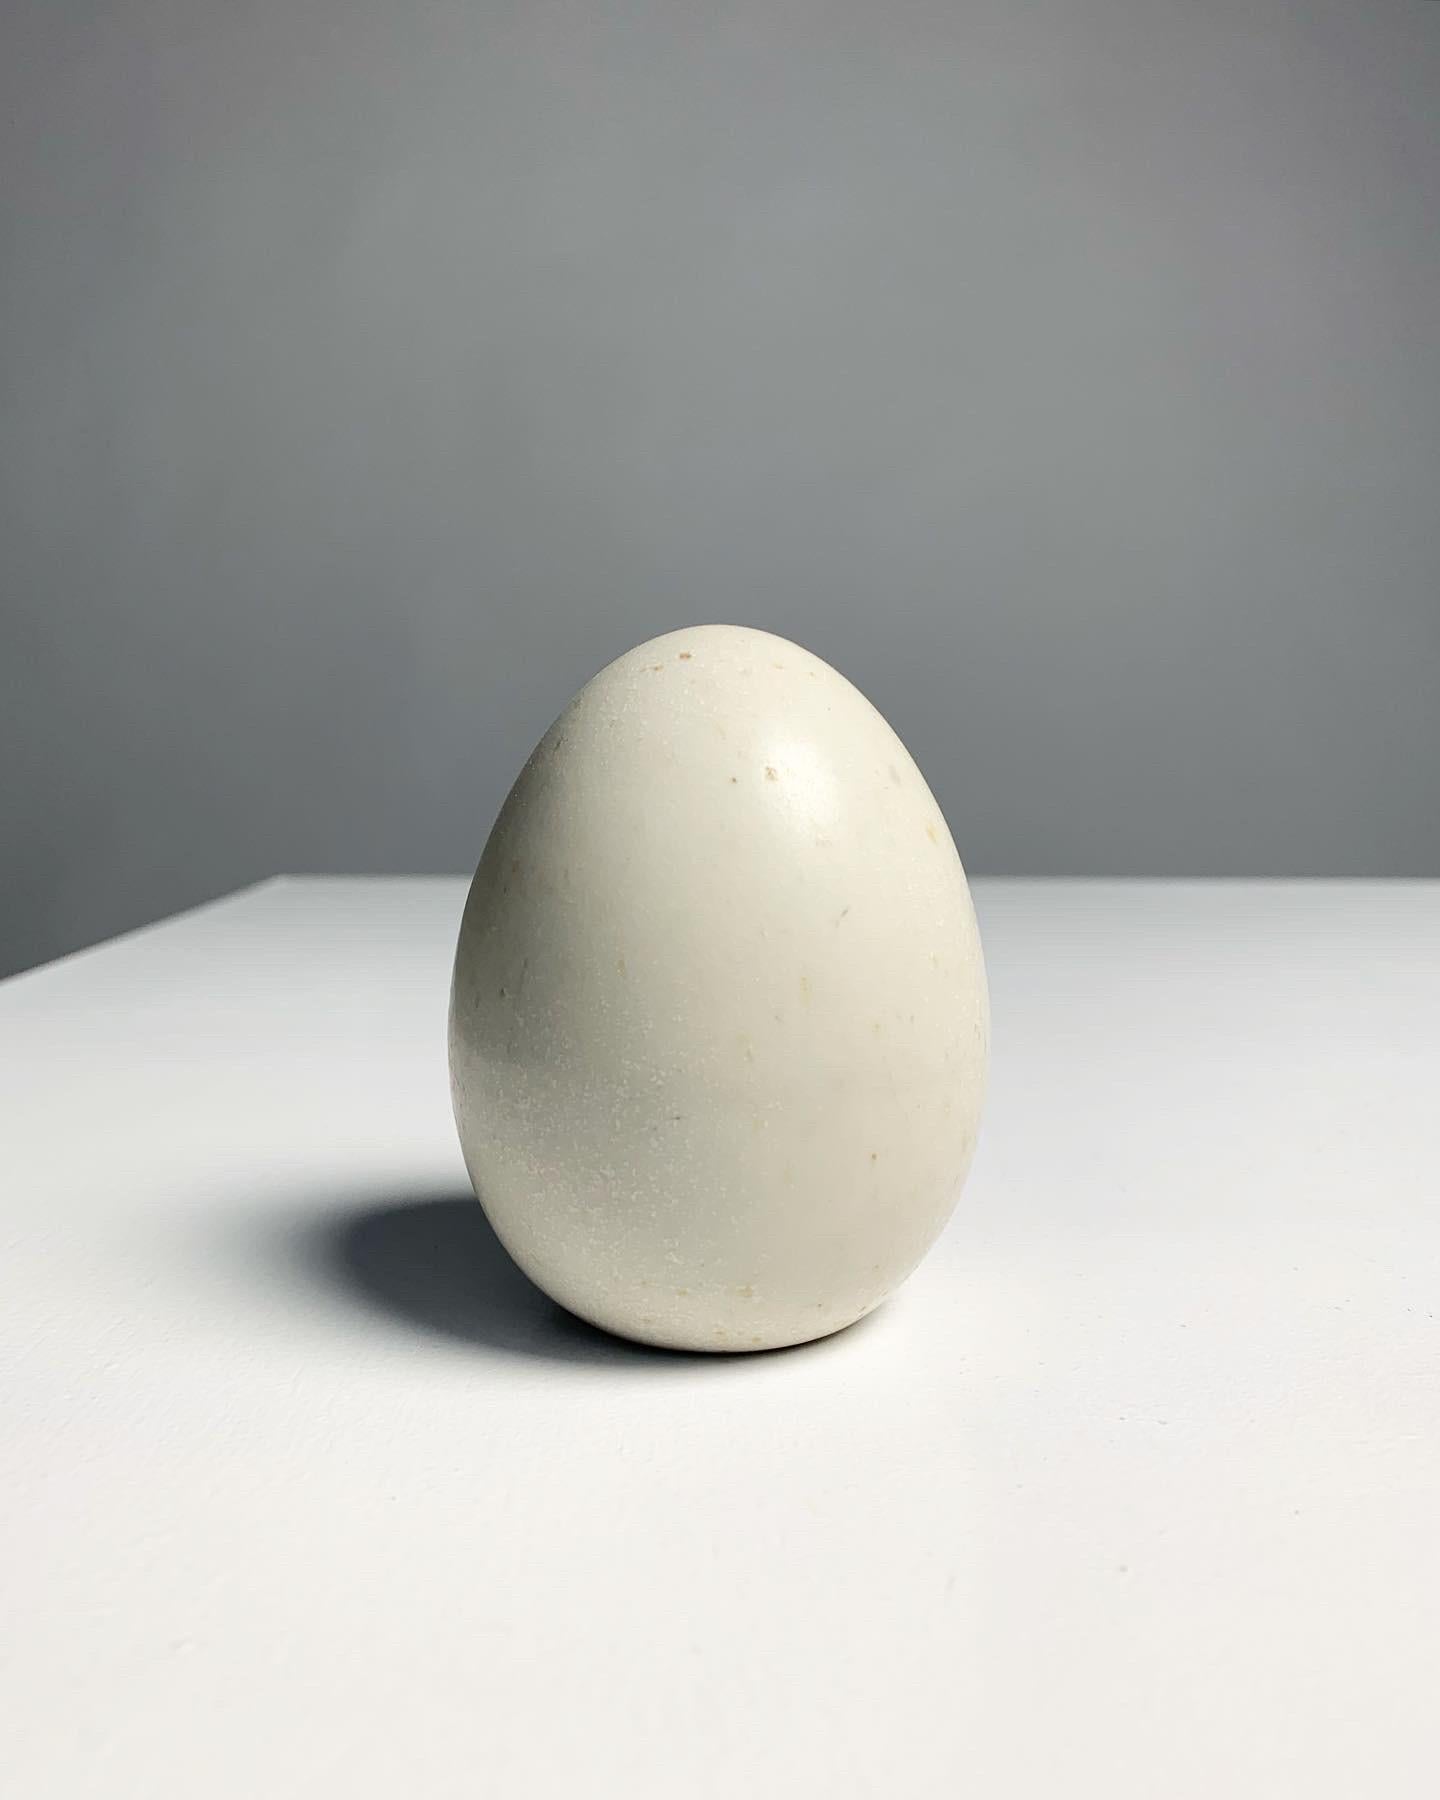 Decorative egg in cream glazed stoneware by ceramic artist Sven Wejsfelt, hand-crafted in 1981 in his studio at Gustavsberg factory in Sweden.

Height: 7.5 cm
Diameter: 6 cm


- About the artist
Sven Wejsfelt was an apprentice of Gunnar Nylund at